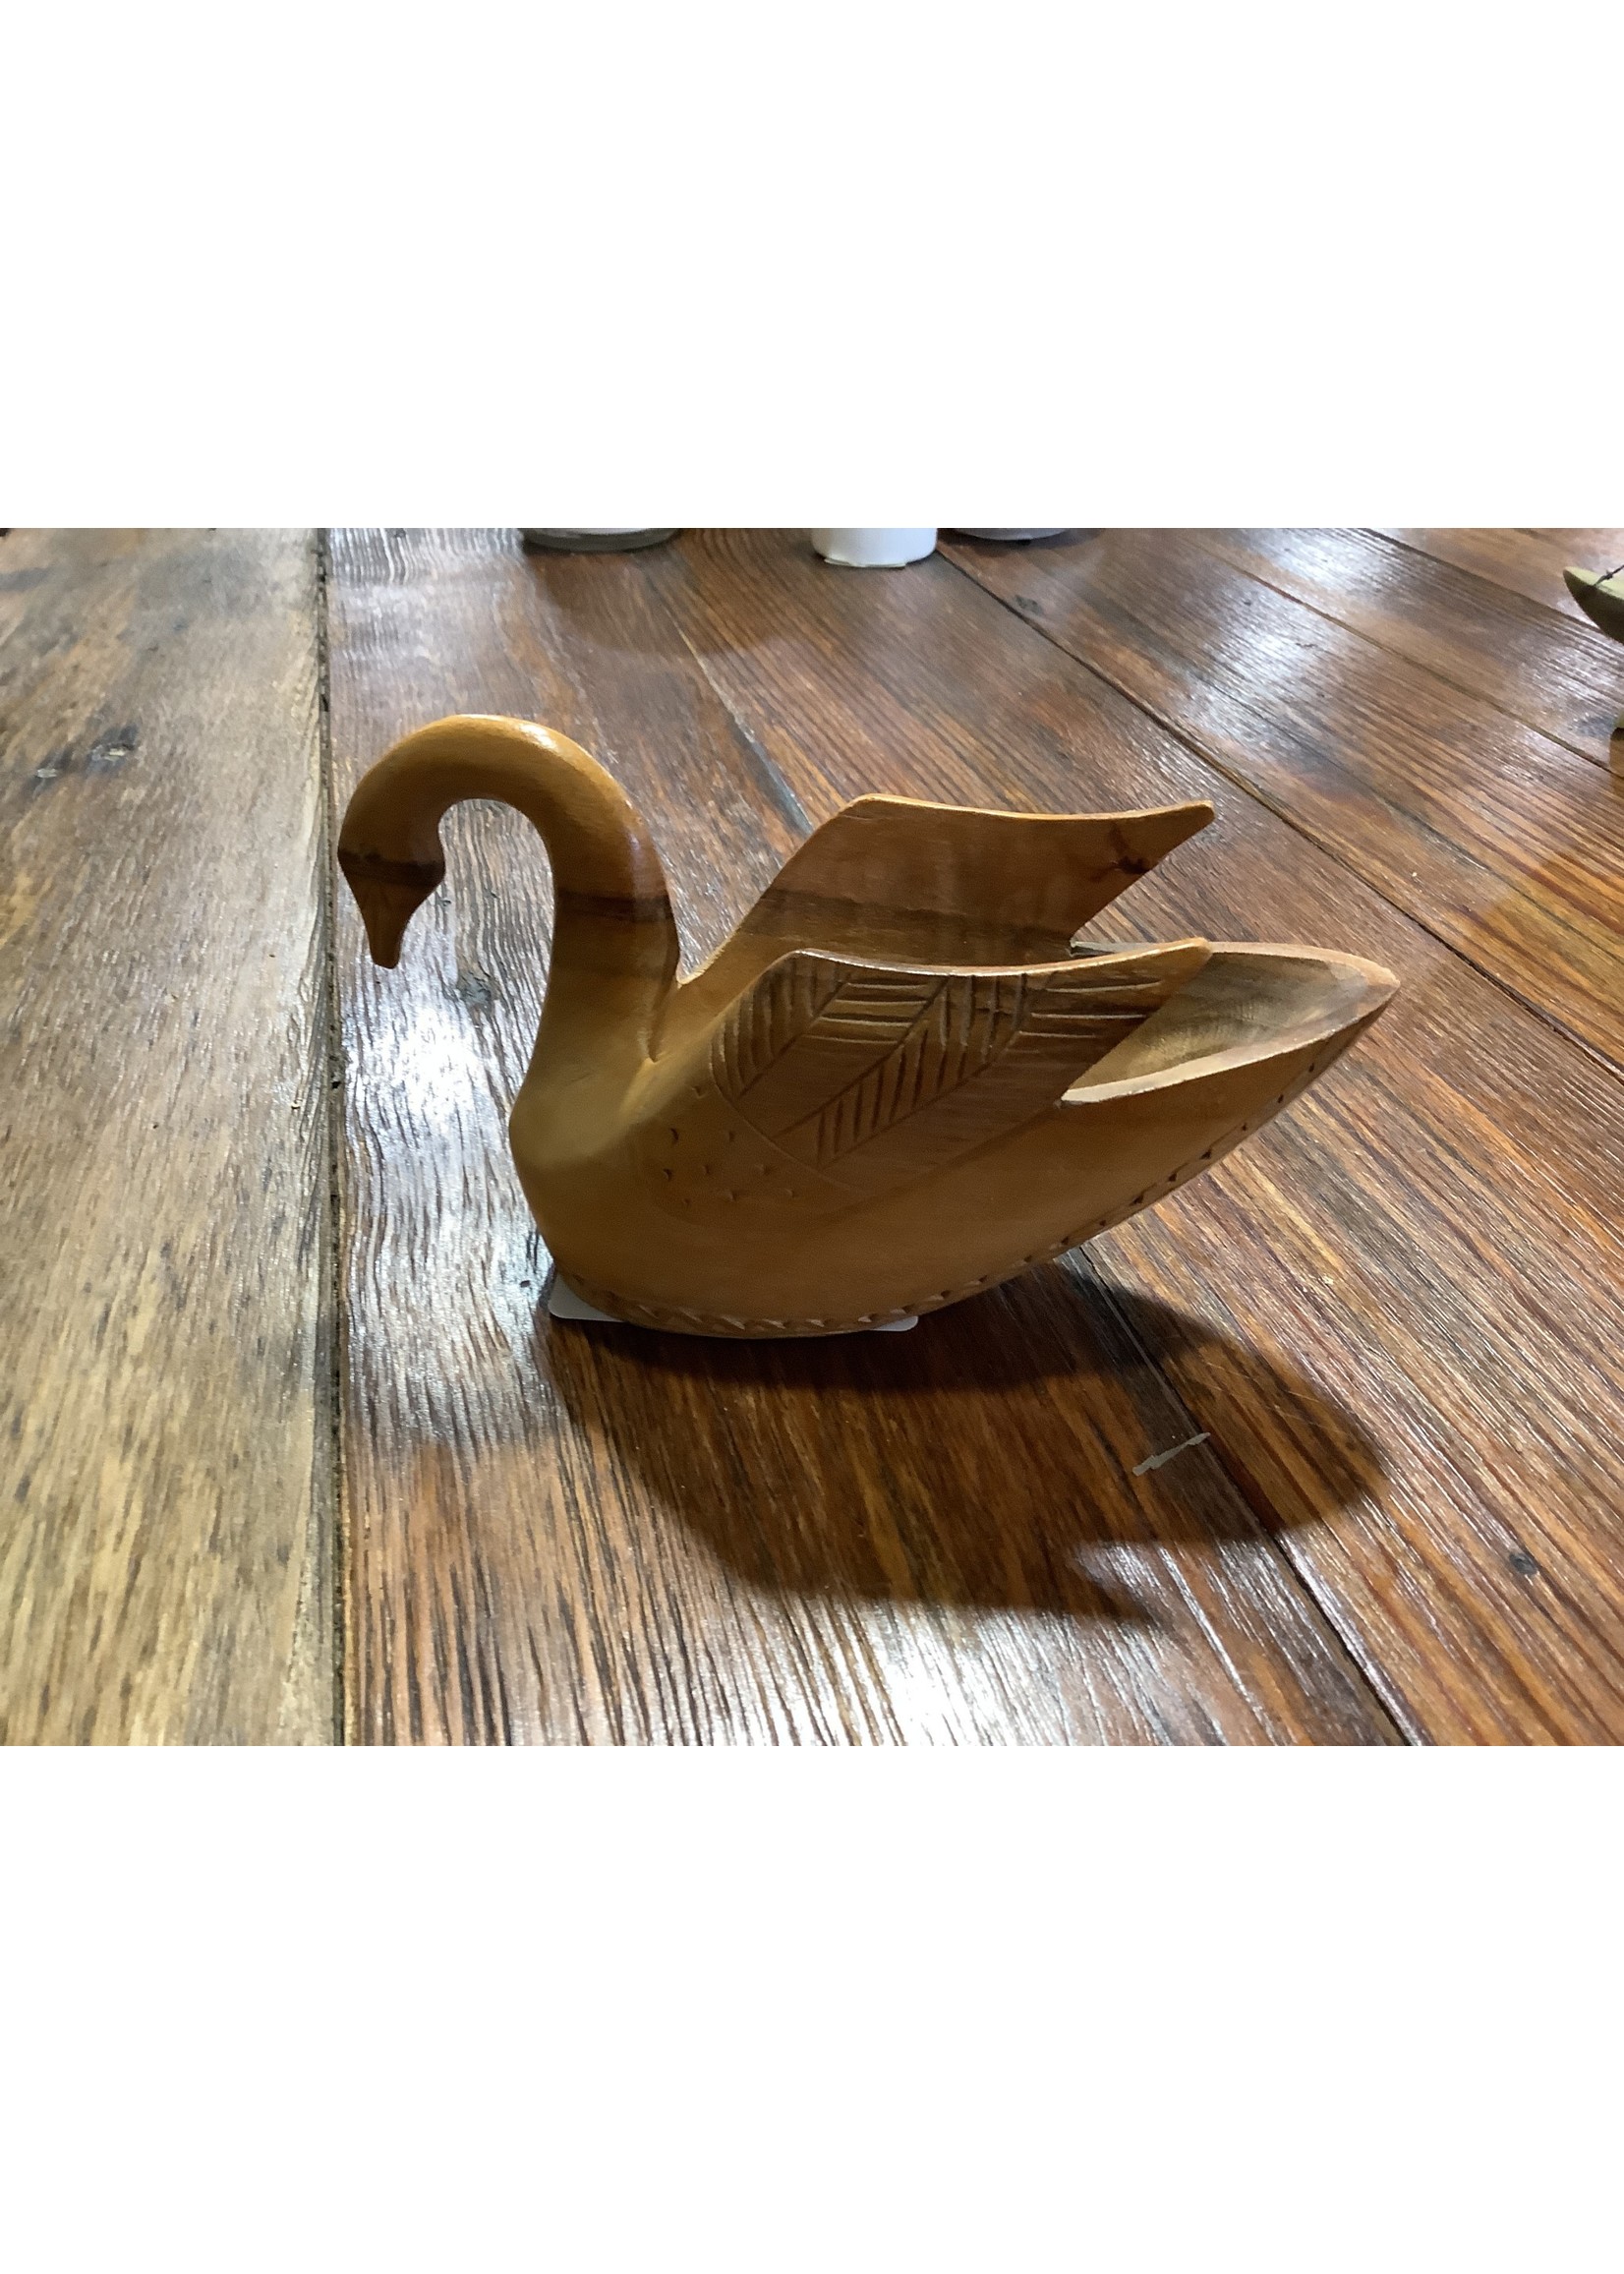 Hand Carved Swan Dish